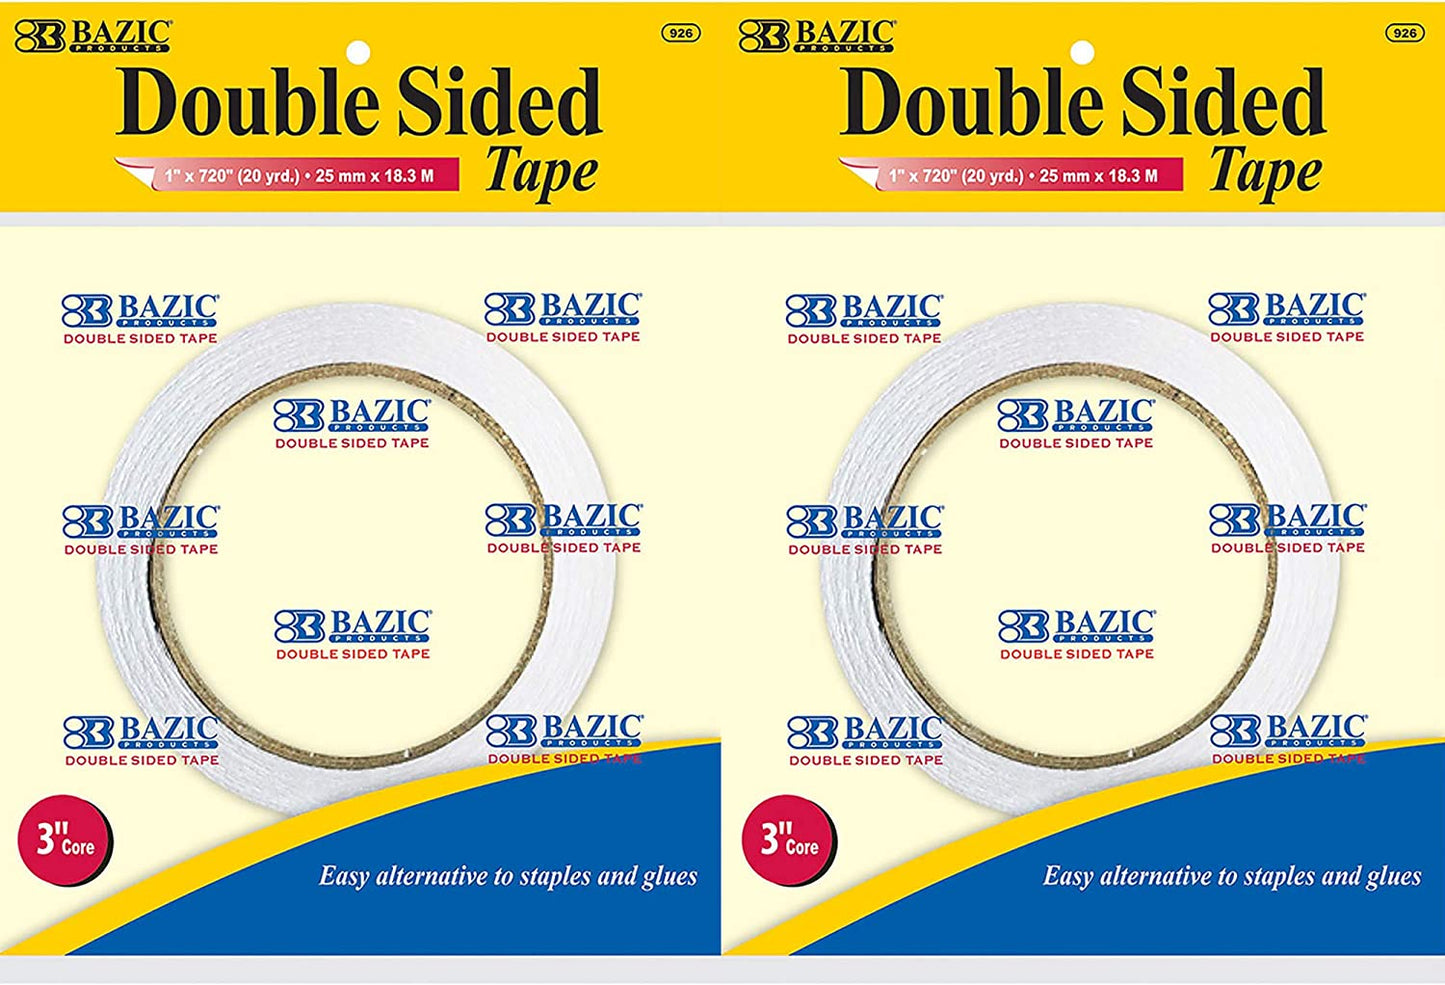 2 Pack, Double Sided Tape, Clear Sticky Adhesive Tapes, for Home Office Decor Gift Wrap, 1" X 20 Yard (720")